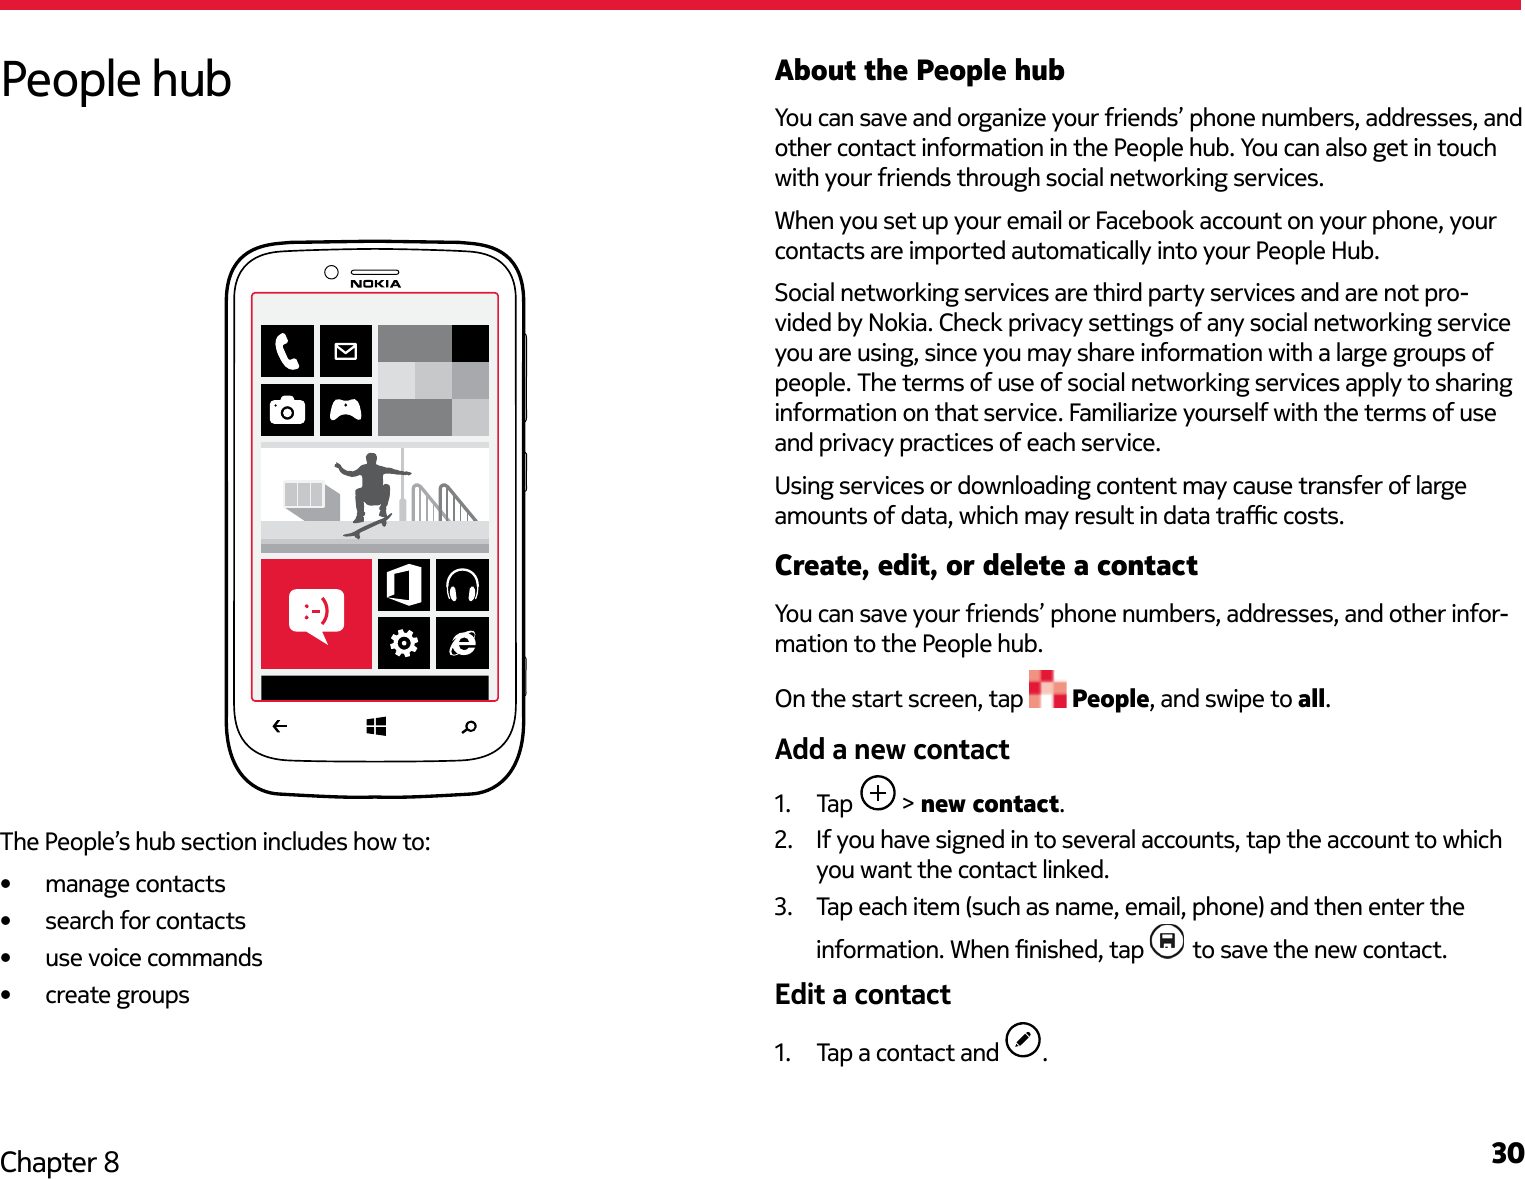 30Chapter 8About the People hubYou can save and organize your friends’ phone numbers, addresses, and other contact information in the People hub. You can also get in touch with your friends through social networking services.When you set up your email or Facebook account on your phone, your contacts are imported automatically into your People Hub.Social networking services are third party services and are not pro-vided by Nokia. Check privacy settings of any social networking service you are using, since you may share information with a large groups of people. The terms of use of social networking services apply to sharing information on that service. Familiarize yourself with the terms of use and privacy practices of each service. Using services or downloading content may cause transfer of large Create, edit, or delete a contactYou can save your friends’ phone numbers, addresses, and other infor-mation to the People hub. On the start screen, tap   People, and swipe to all.1.  Tap   &gt; new contact.2.  If you have signed in to several accounts, tap the account to which you want the contact linked.3.  Tap each item (such as name, email, phone) and then enter the   to save the new contact.1.  Tap a contact and  .People hubThe People’s hub section includes how to: manage contacts search for contacts use voice commands create groups